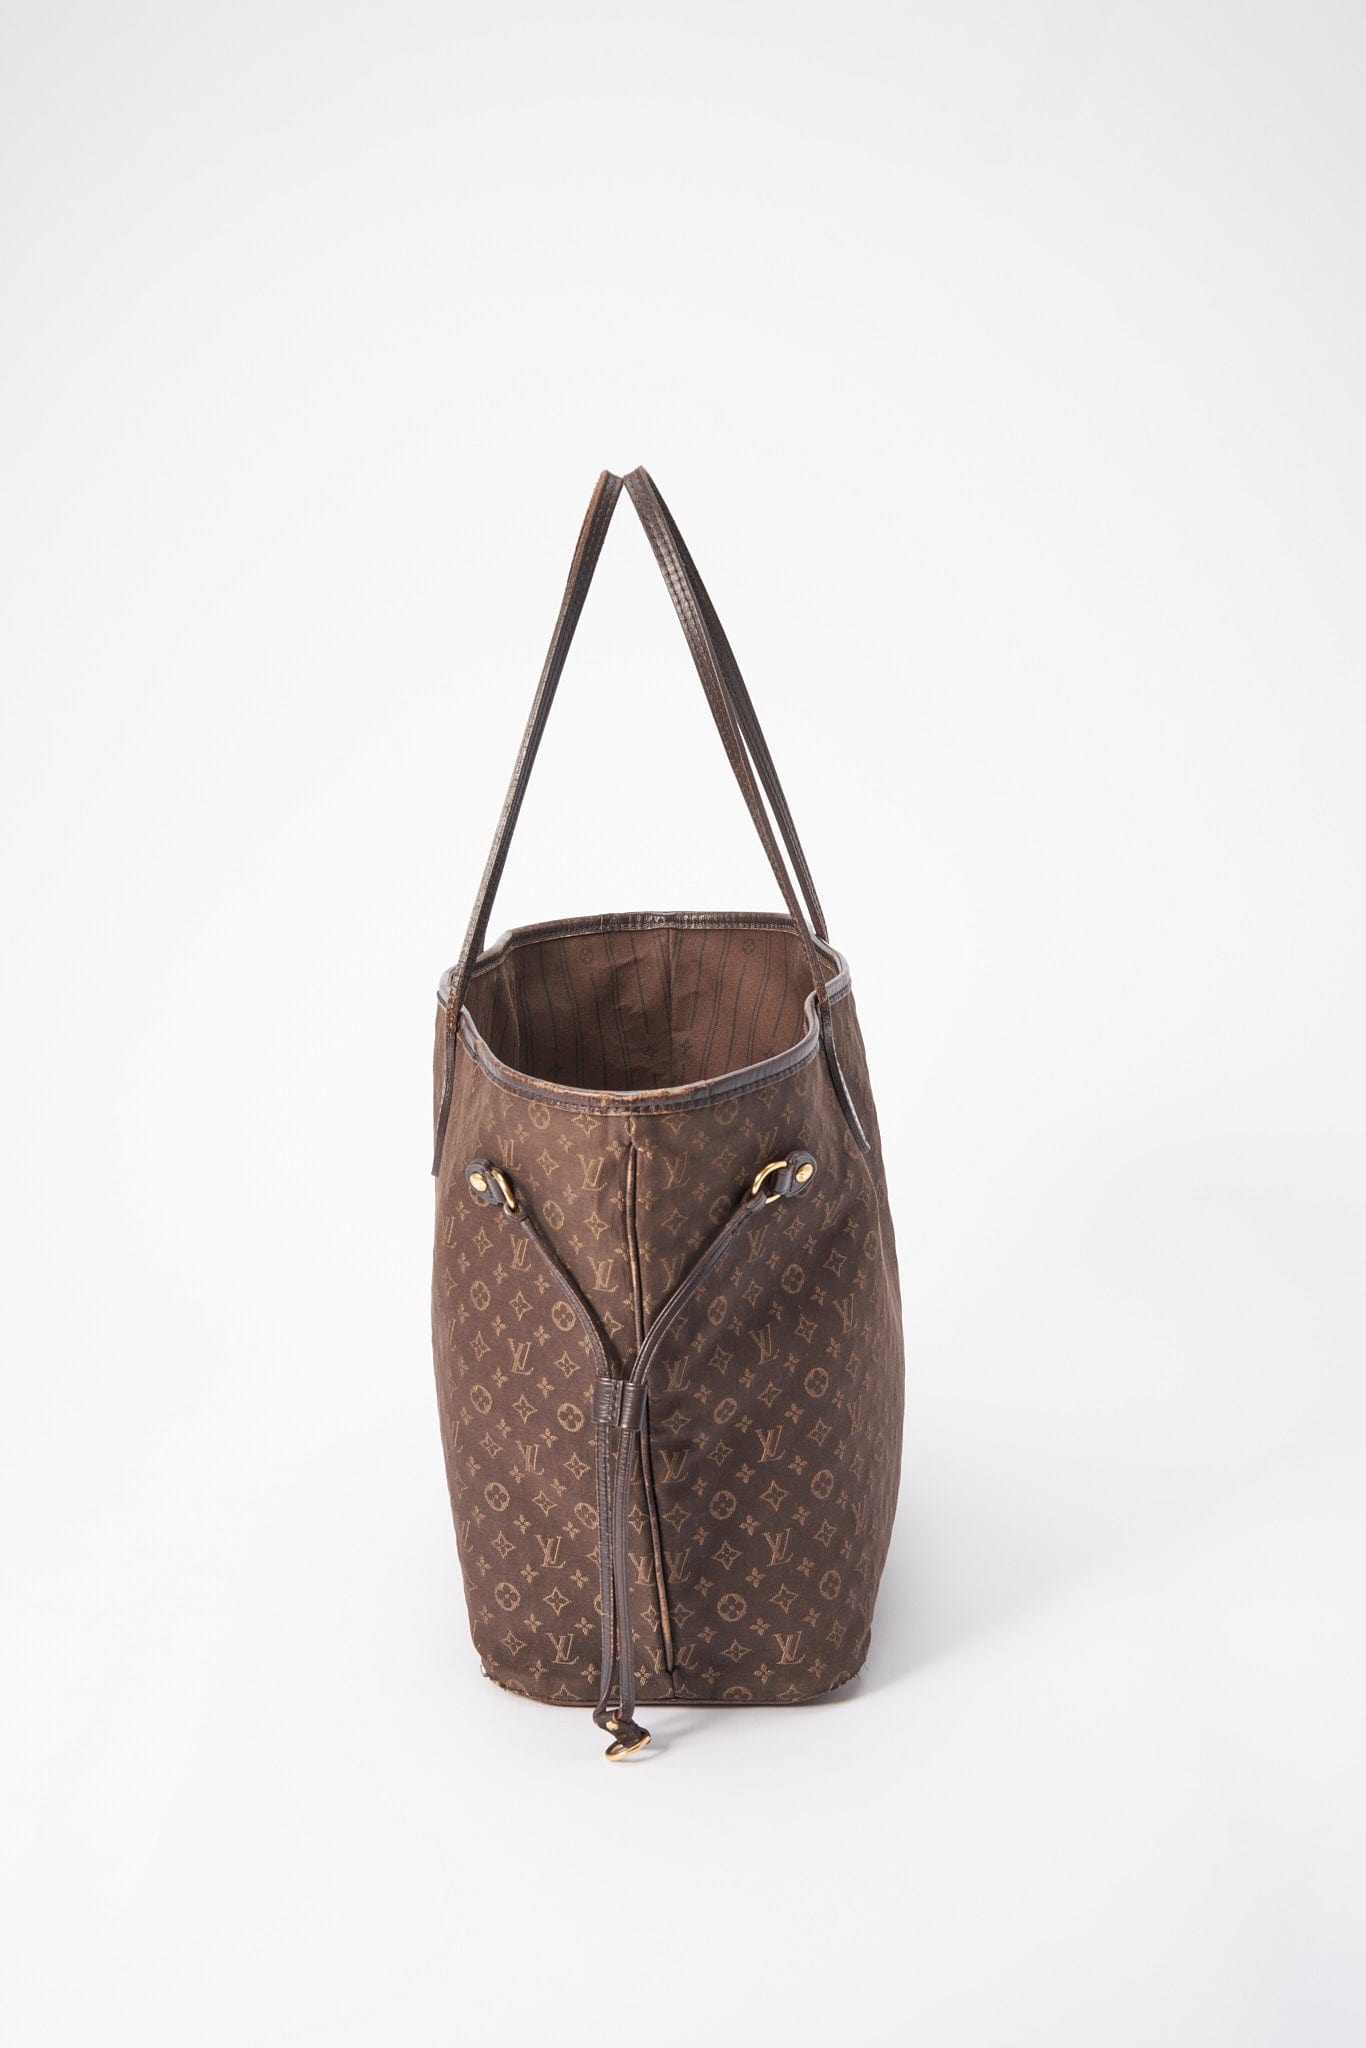 Louis Vuitton Neverfull Tote MM Beige Leather for sale online